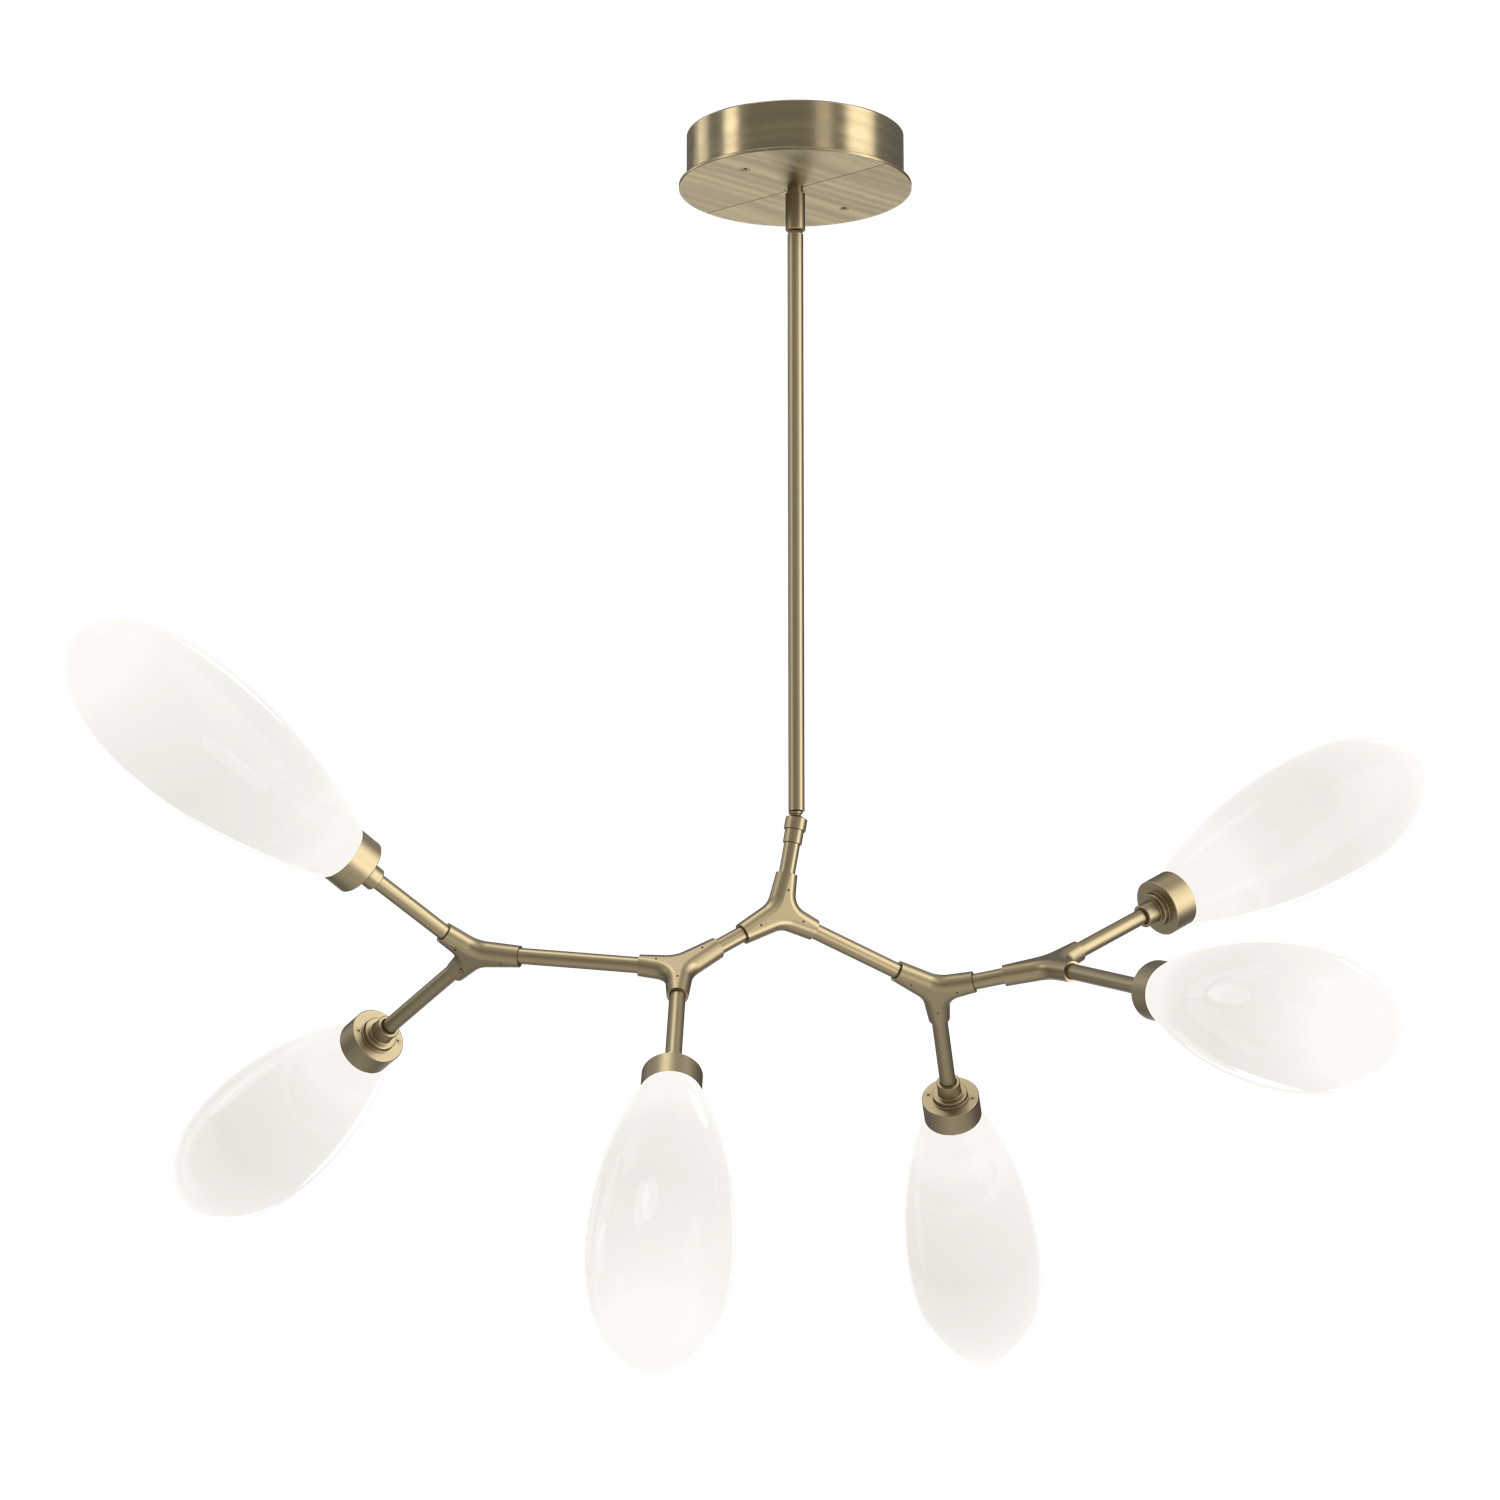 PLB0071-BA-HB-WL-LL-Hammerton-Studio-Fiori-6-light-organic-branch-chandelier-with-heritage-brass-finish-and-opal-white-glass-shades-and-LED-lamping